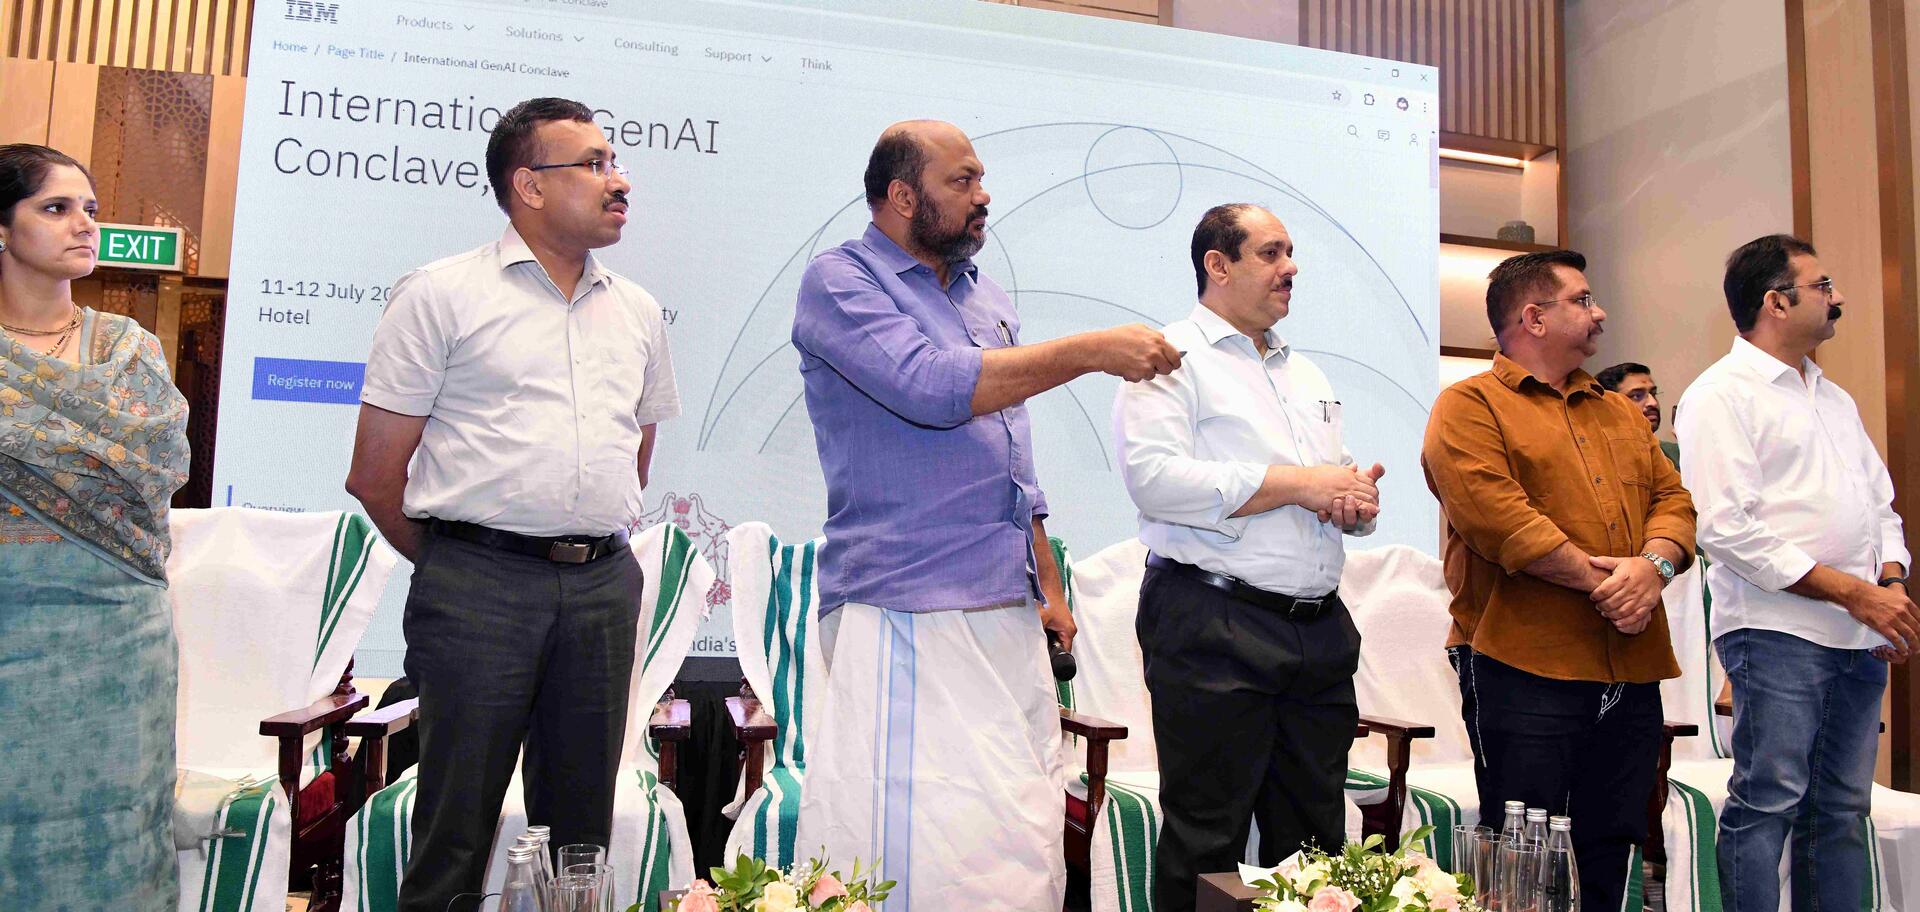 Kerala partners with IBM to host global conclave on Gen AI in Kochi    Minister P Rajeeve launches website of July 11-12 event